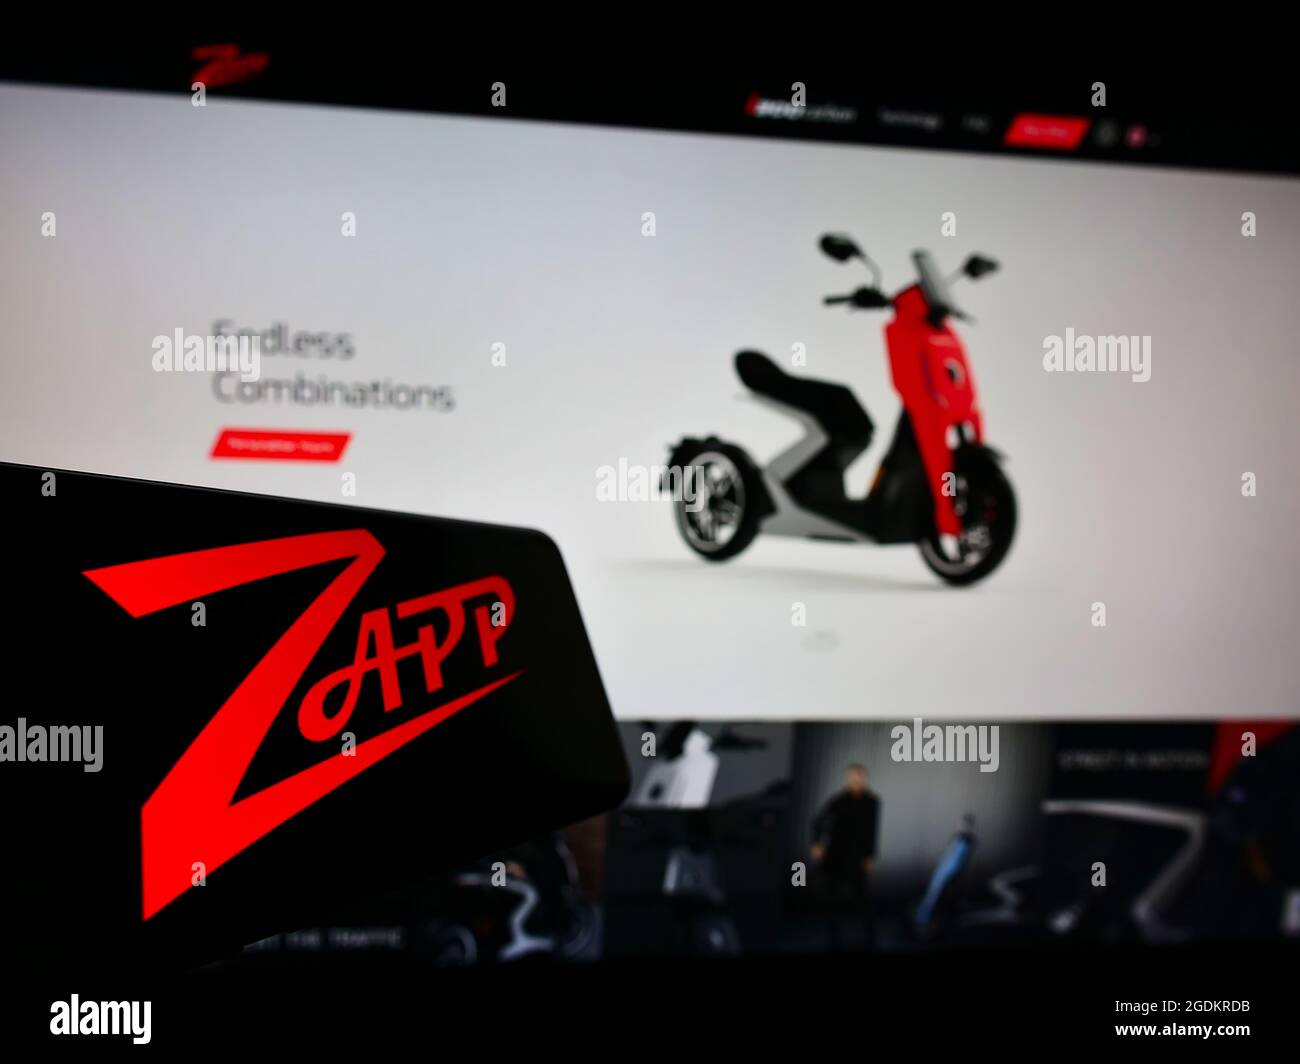 Cellphone with logo of electric motorcycle company Zapp Scooters Ltd. on screen in front of business website. Focus on center-left of phone display. Stock Photo